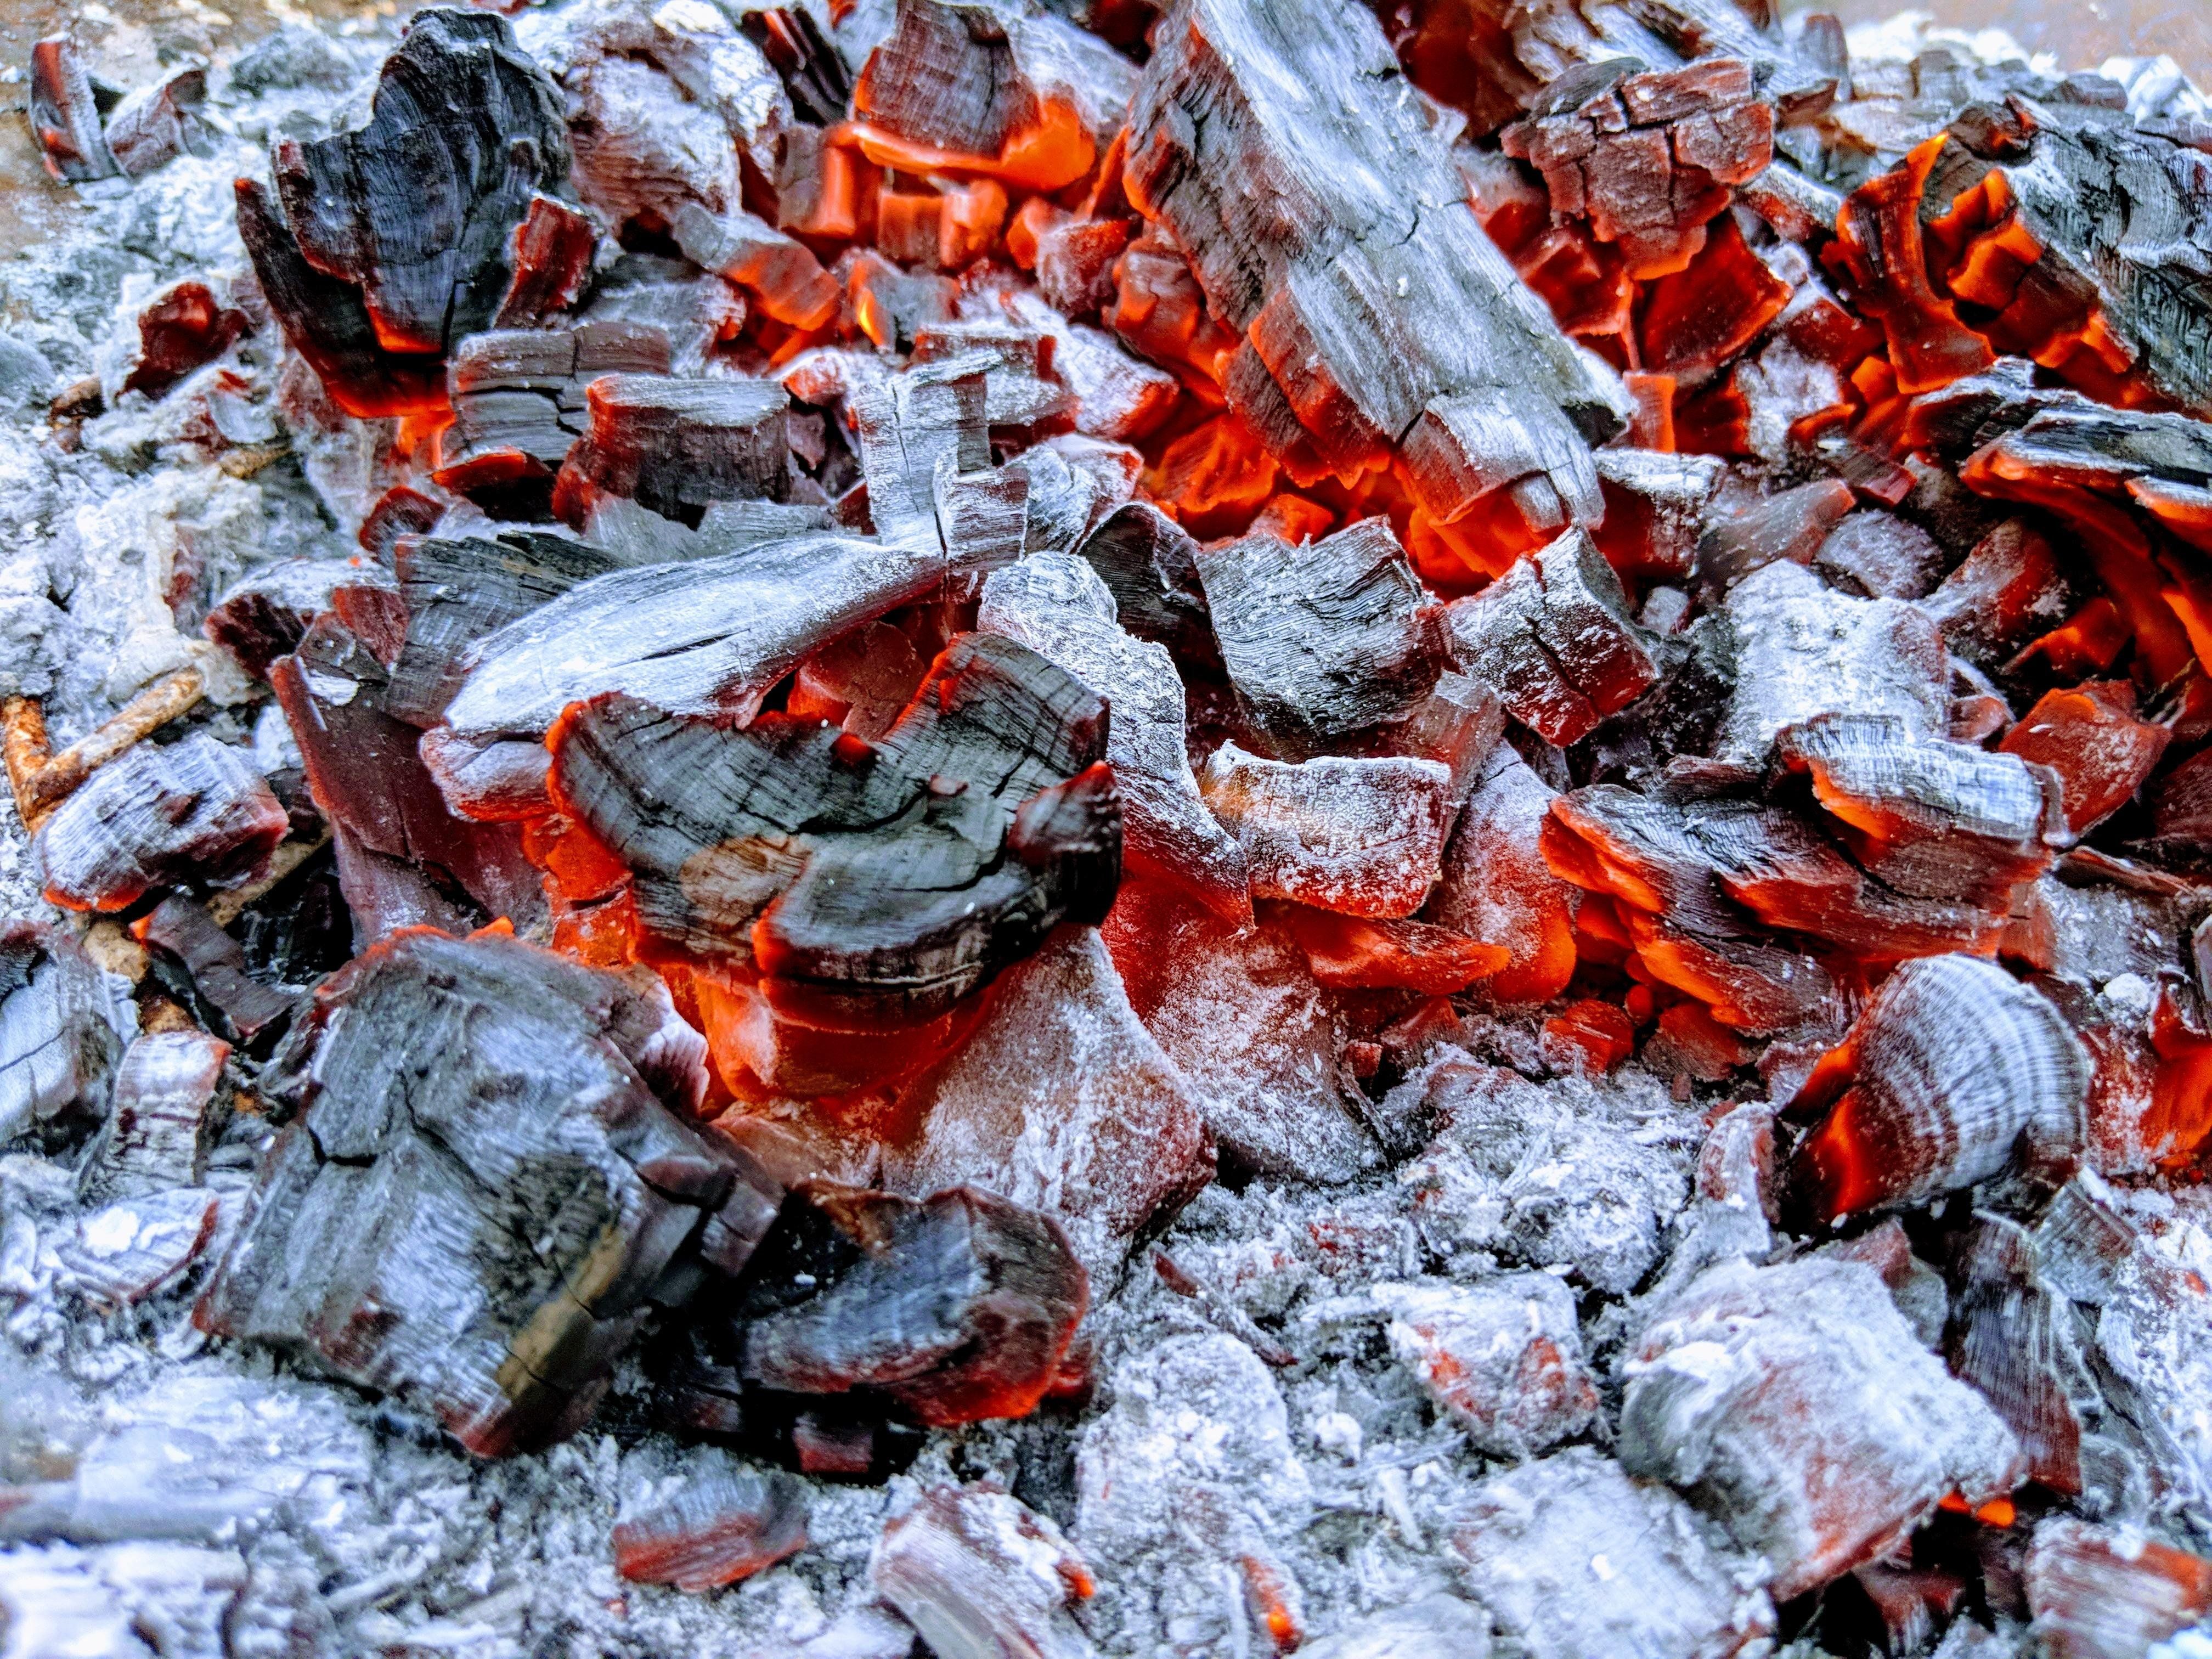 Hot Charcoal From a Dying Fire 4K wallpaper